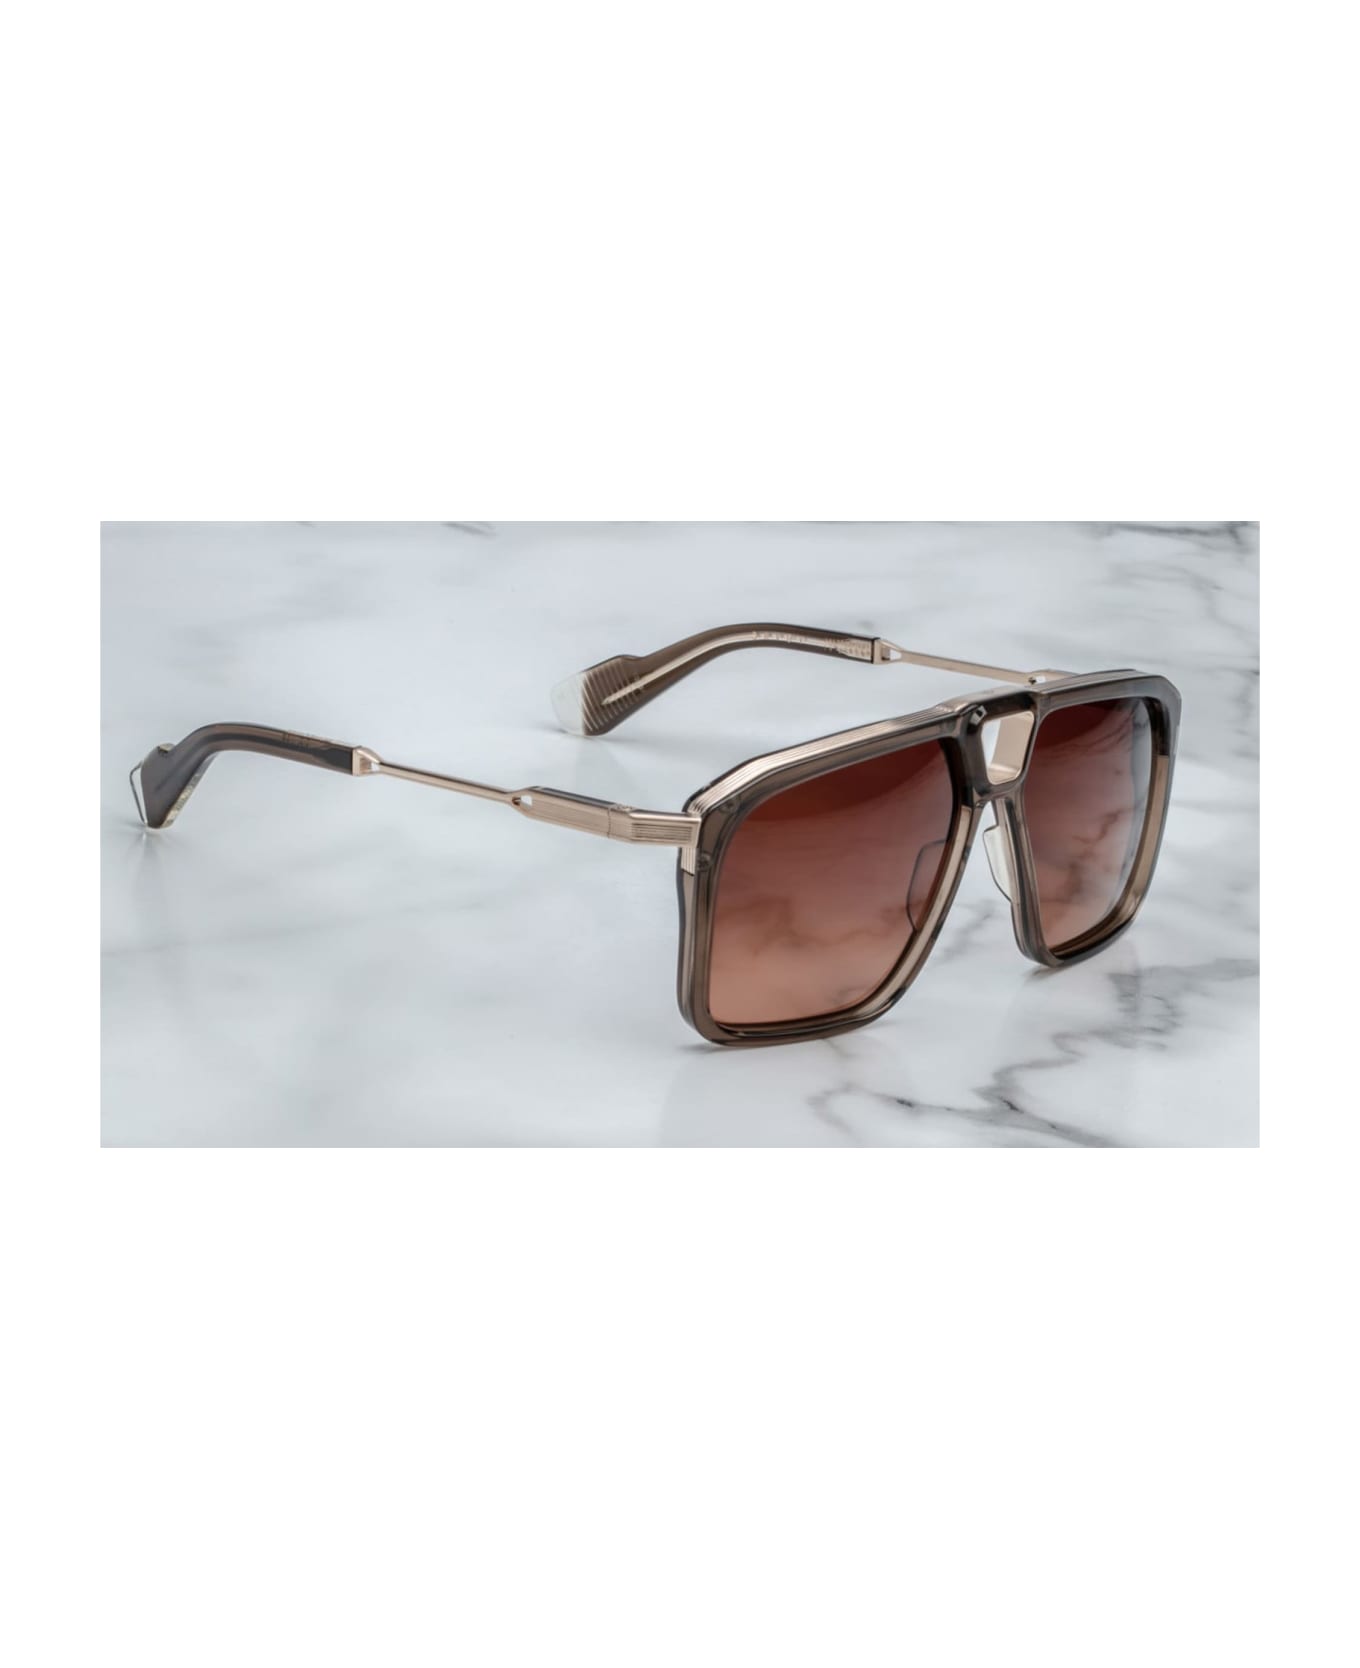 Jacques Marie Mage Savoy - London Sunglasses - brown サングラス